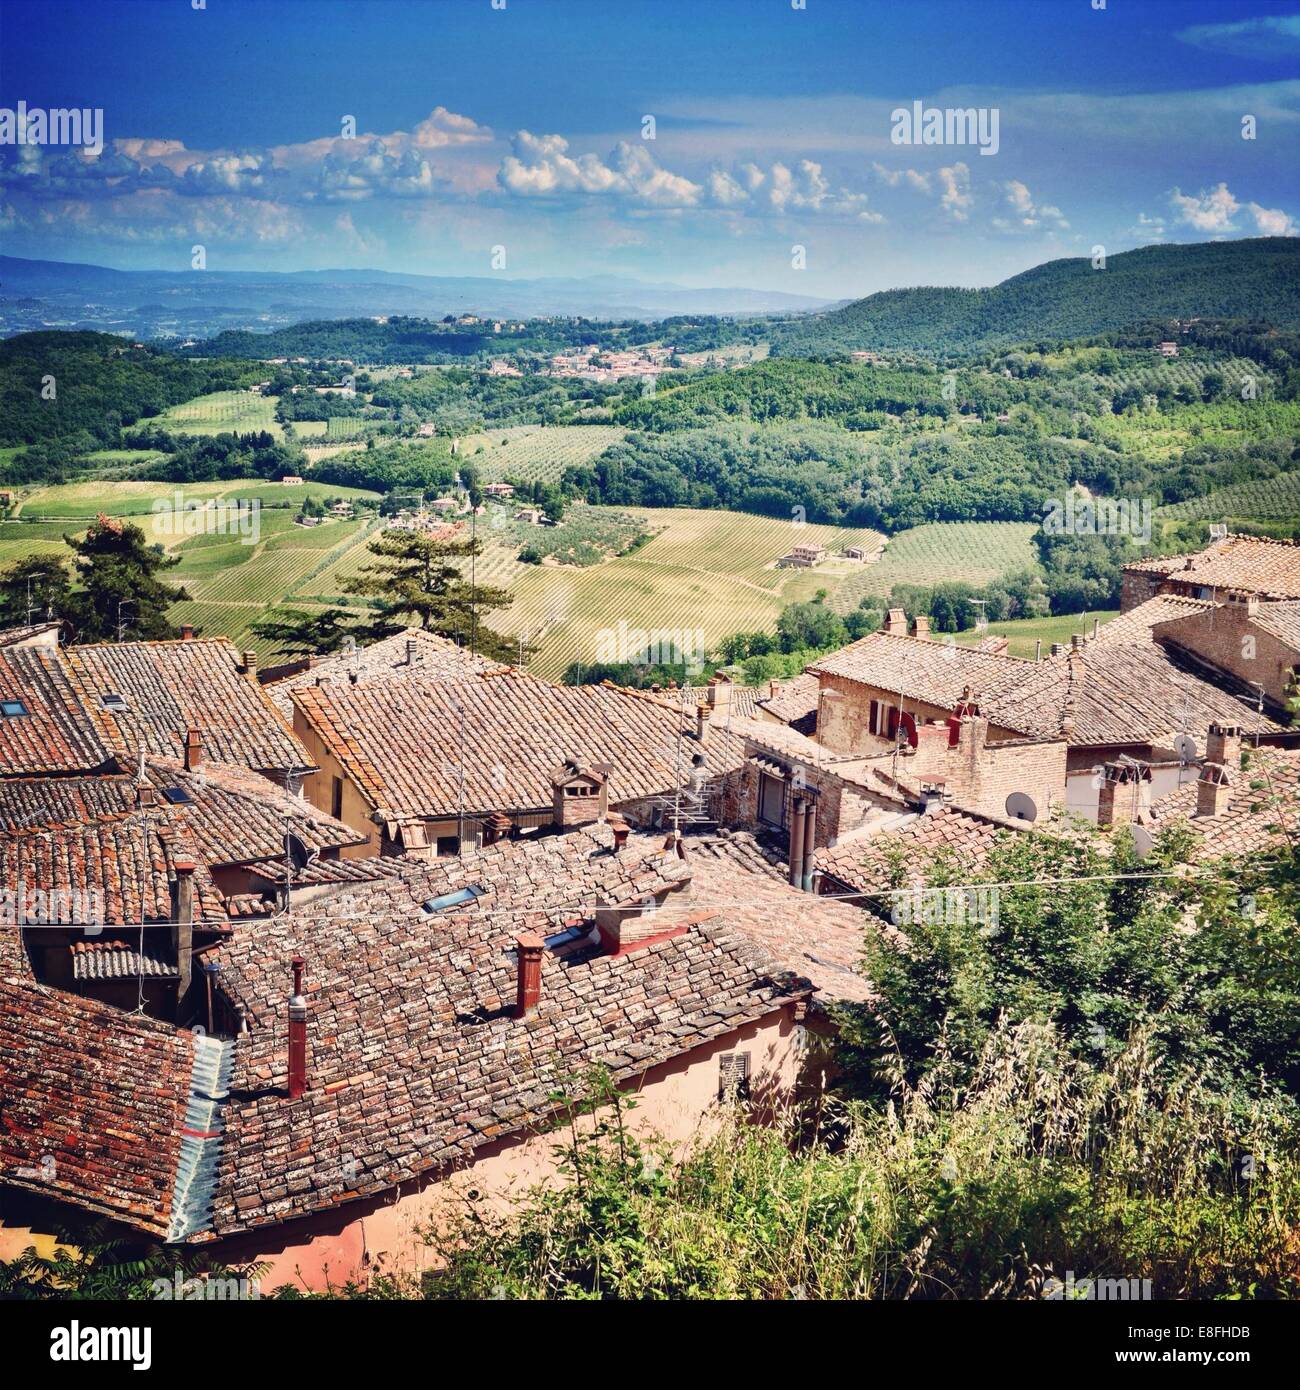 Village rooftops and rural countryside, Tuscany, Italy Stock Photo